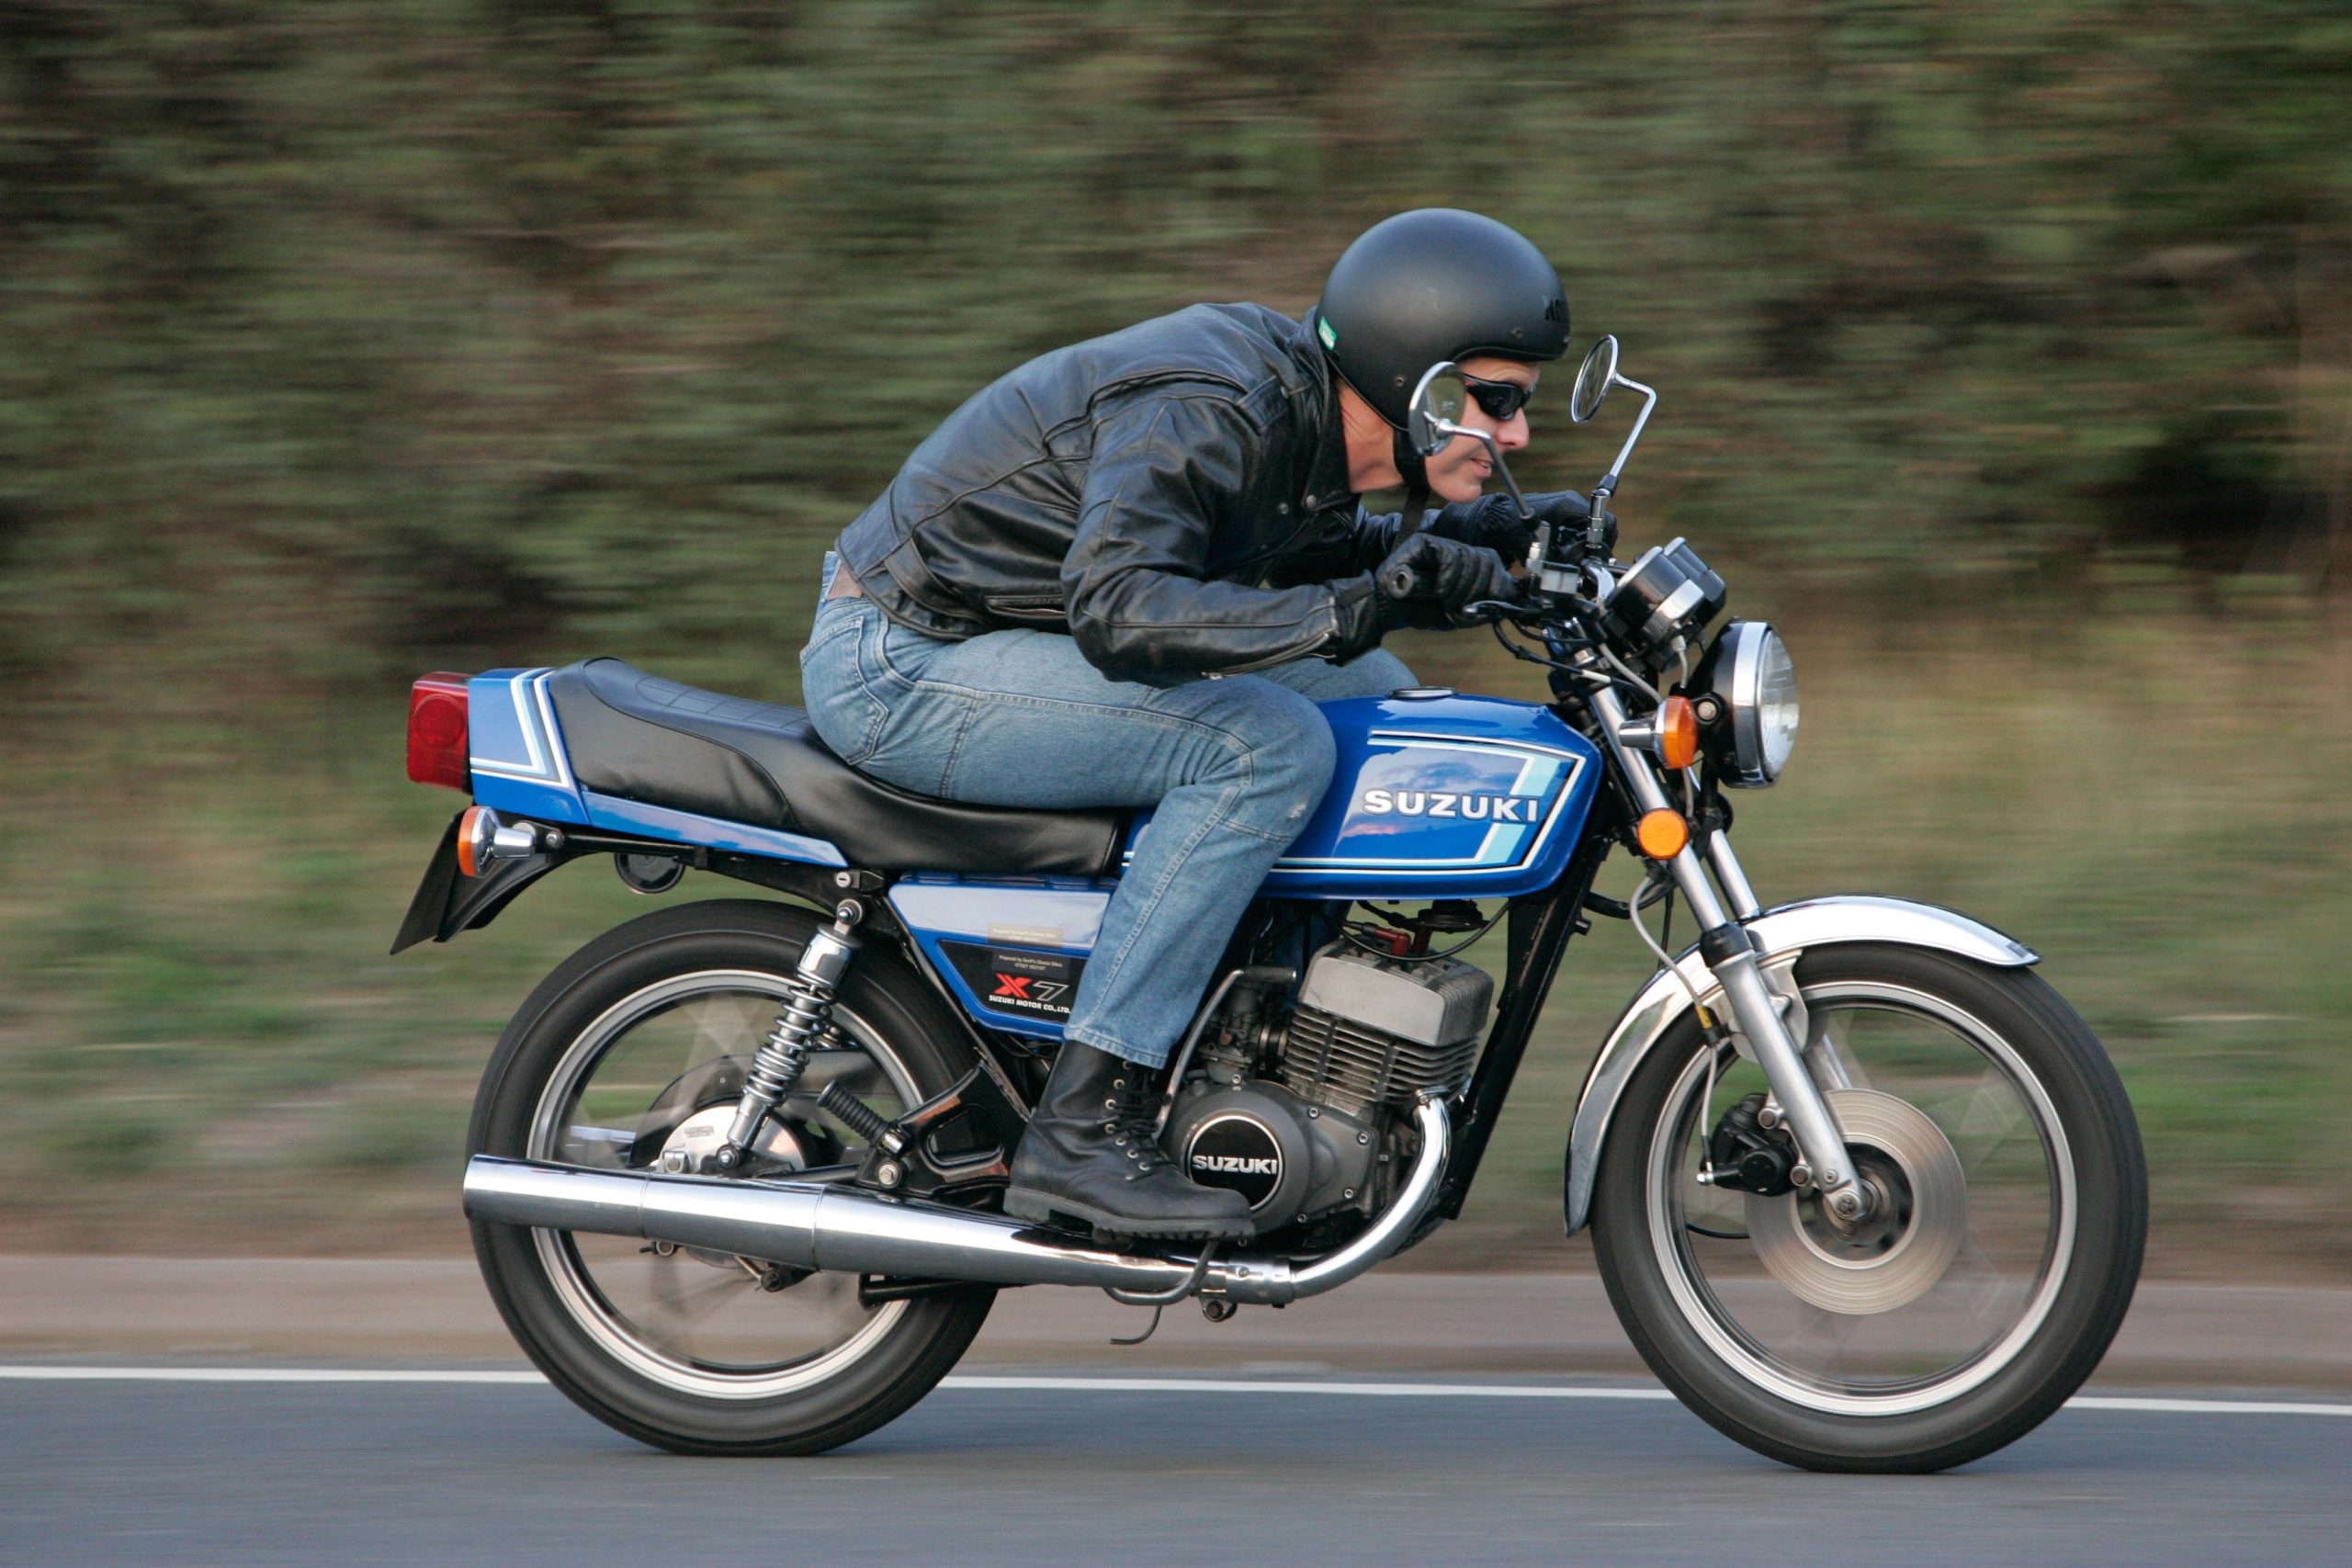 Ton up or not, the Suzuki GT250 X7 was every learner’s dream ride